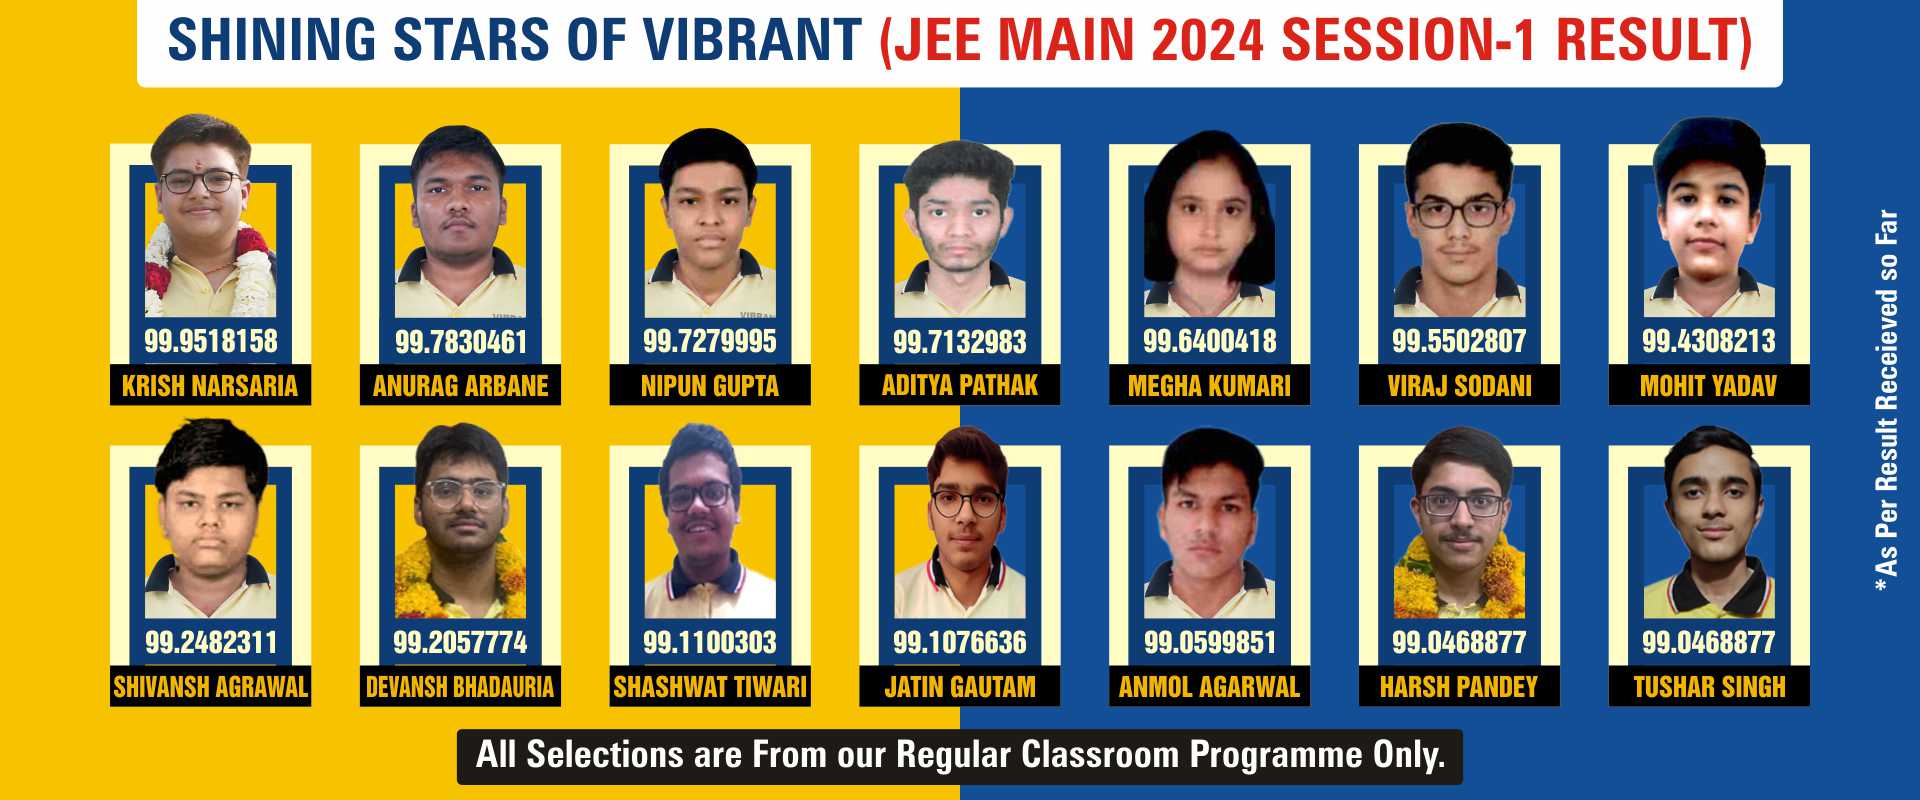 JEE MAIN 2024 SESSION-1 RESULT.